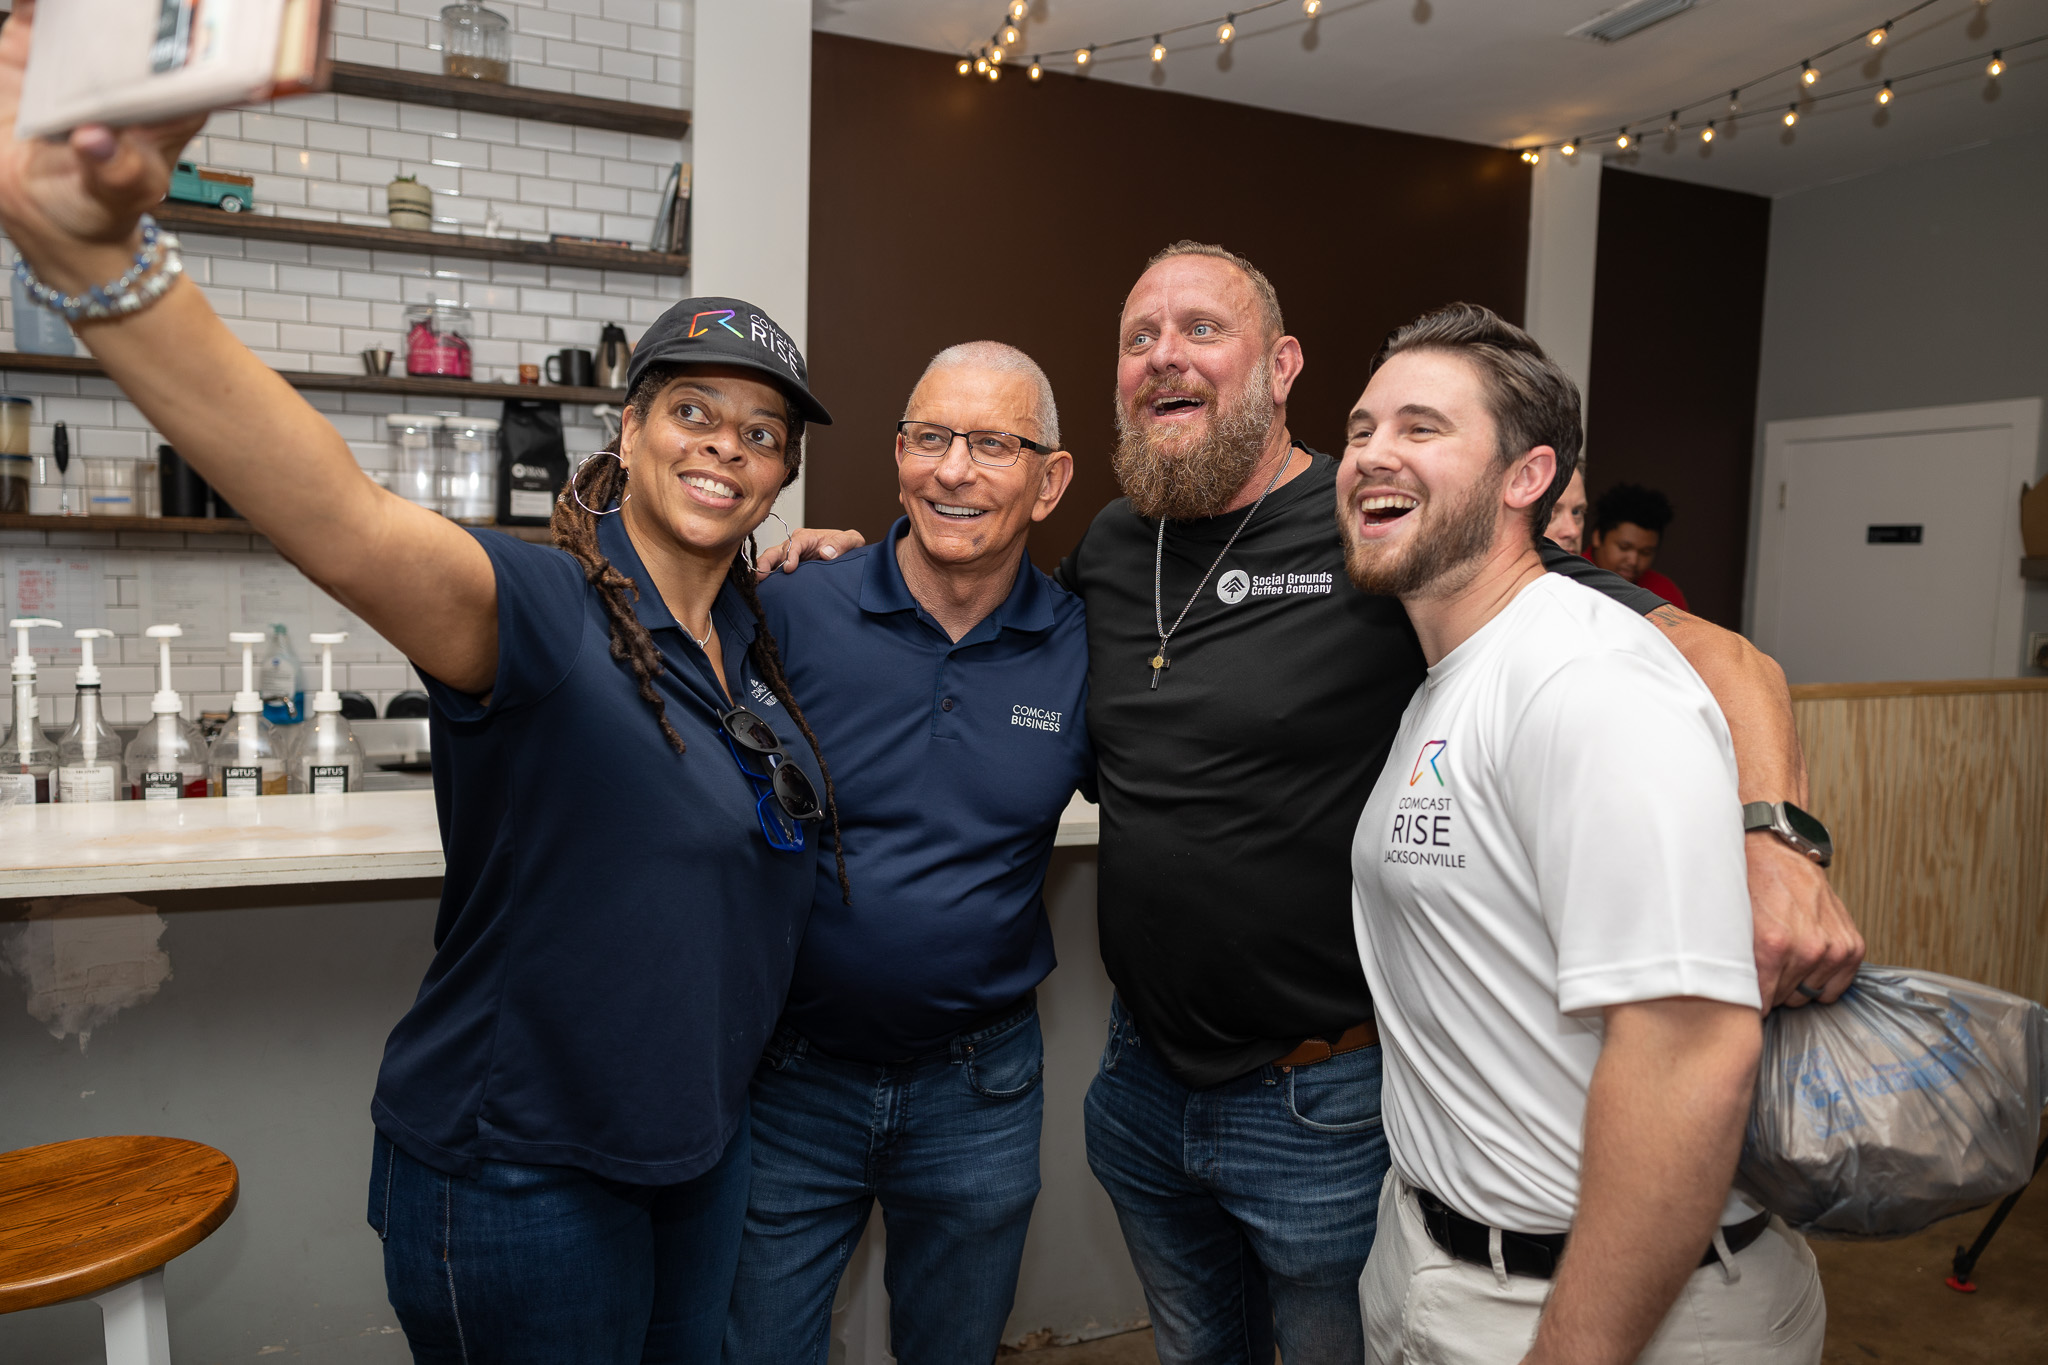 Celebrity Chef Robert Irvine Joins Comcast RISE to Celebrate Small Businesses and Veterans in Greater Jacksonville